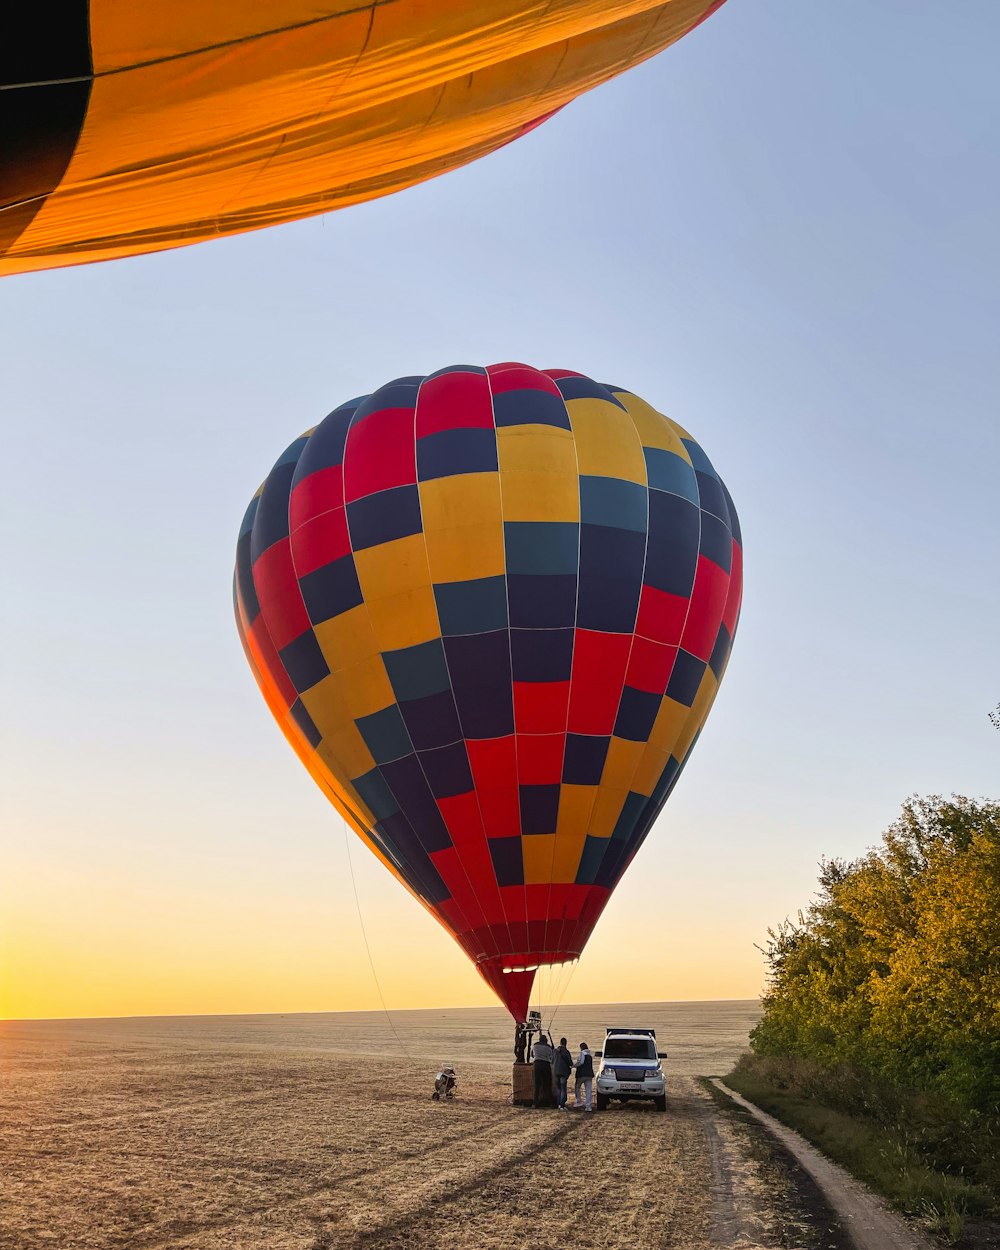 a large hot air balloon flying over a dirt road